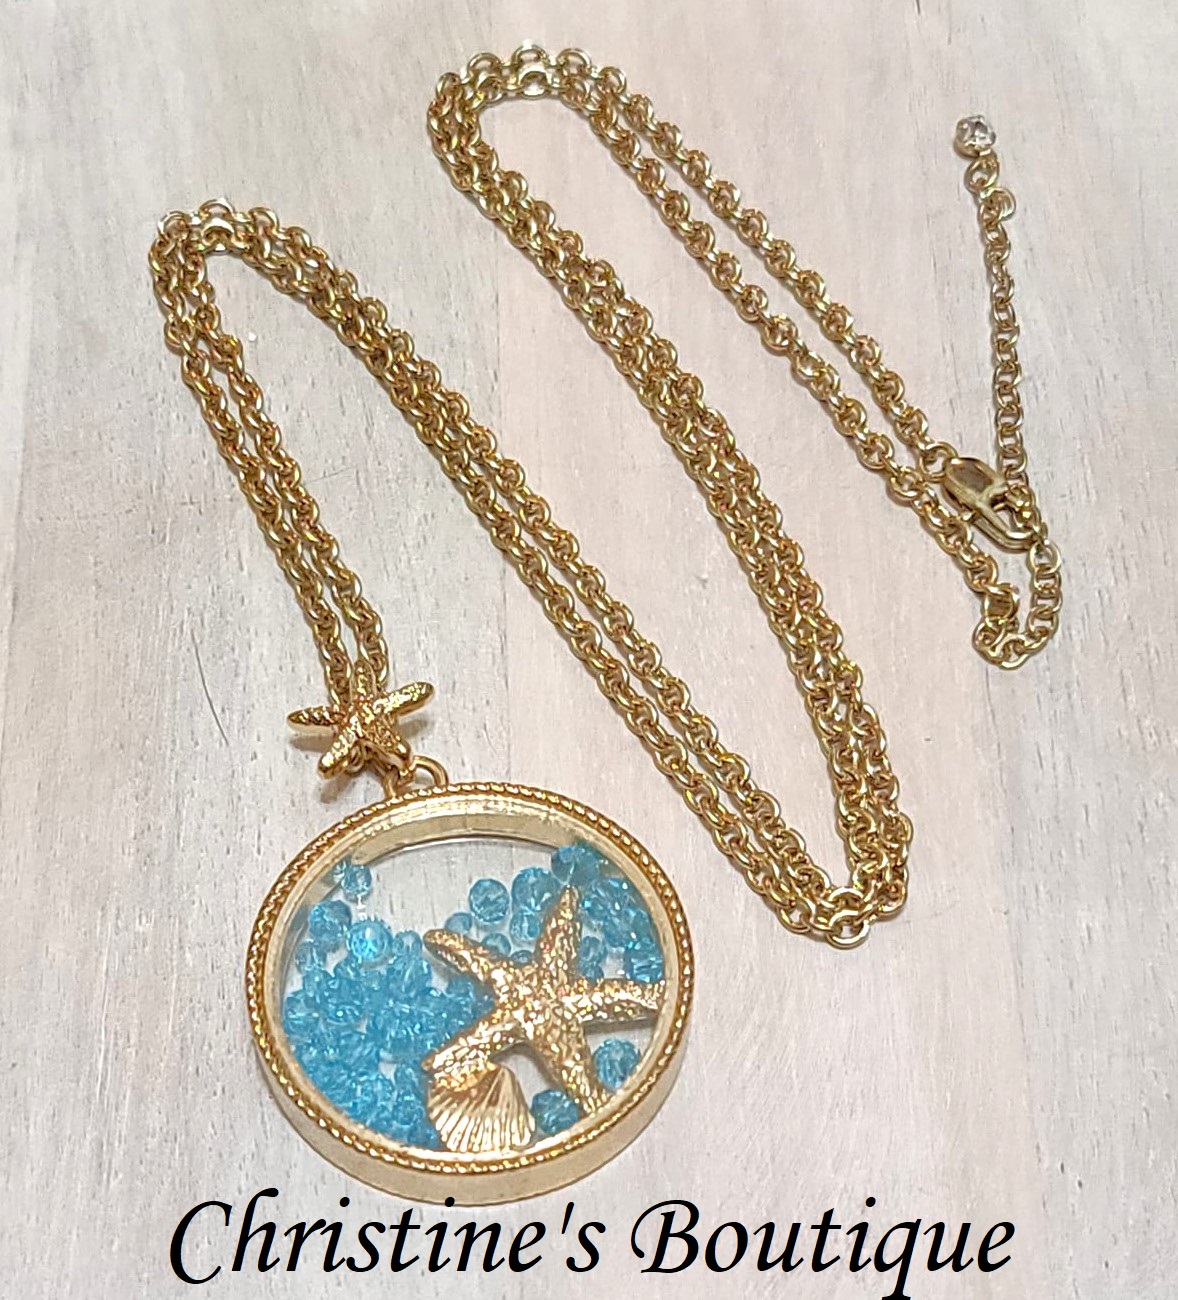 Sea Life pendant necklace, with austrian crystals and starfish theme - Click Image to Close